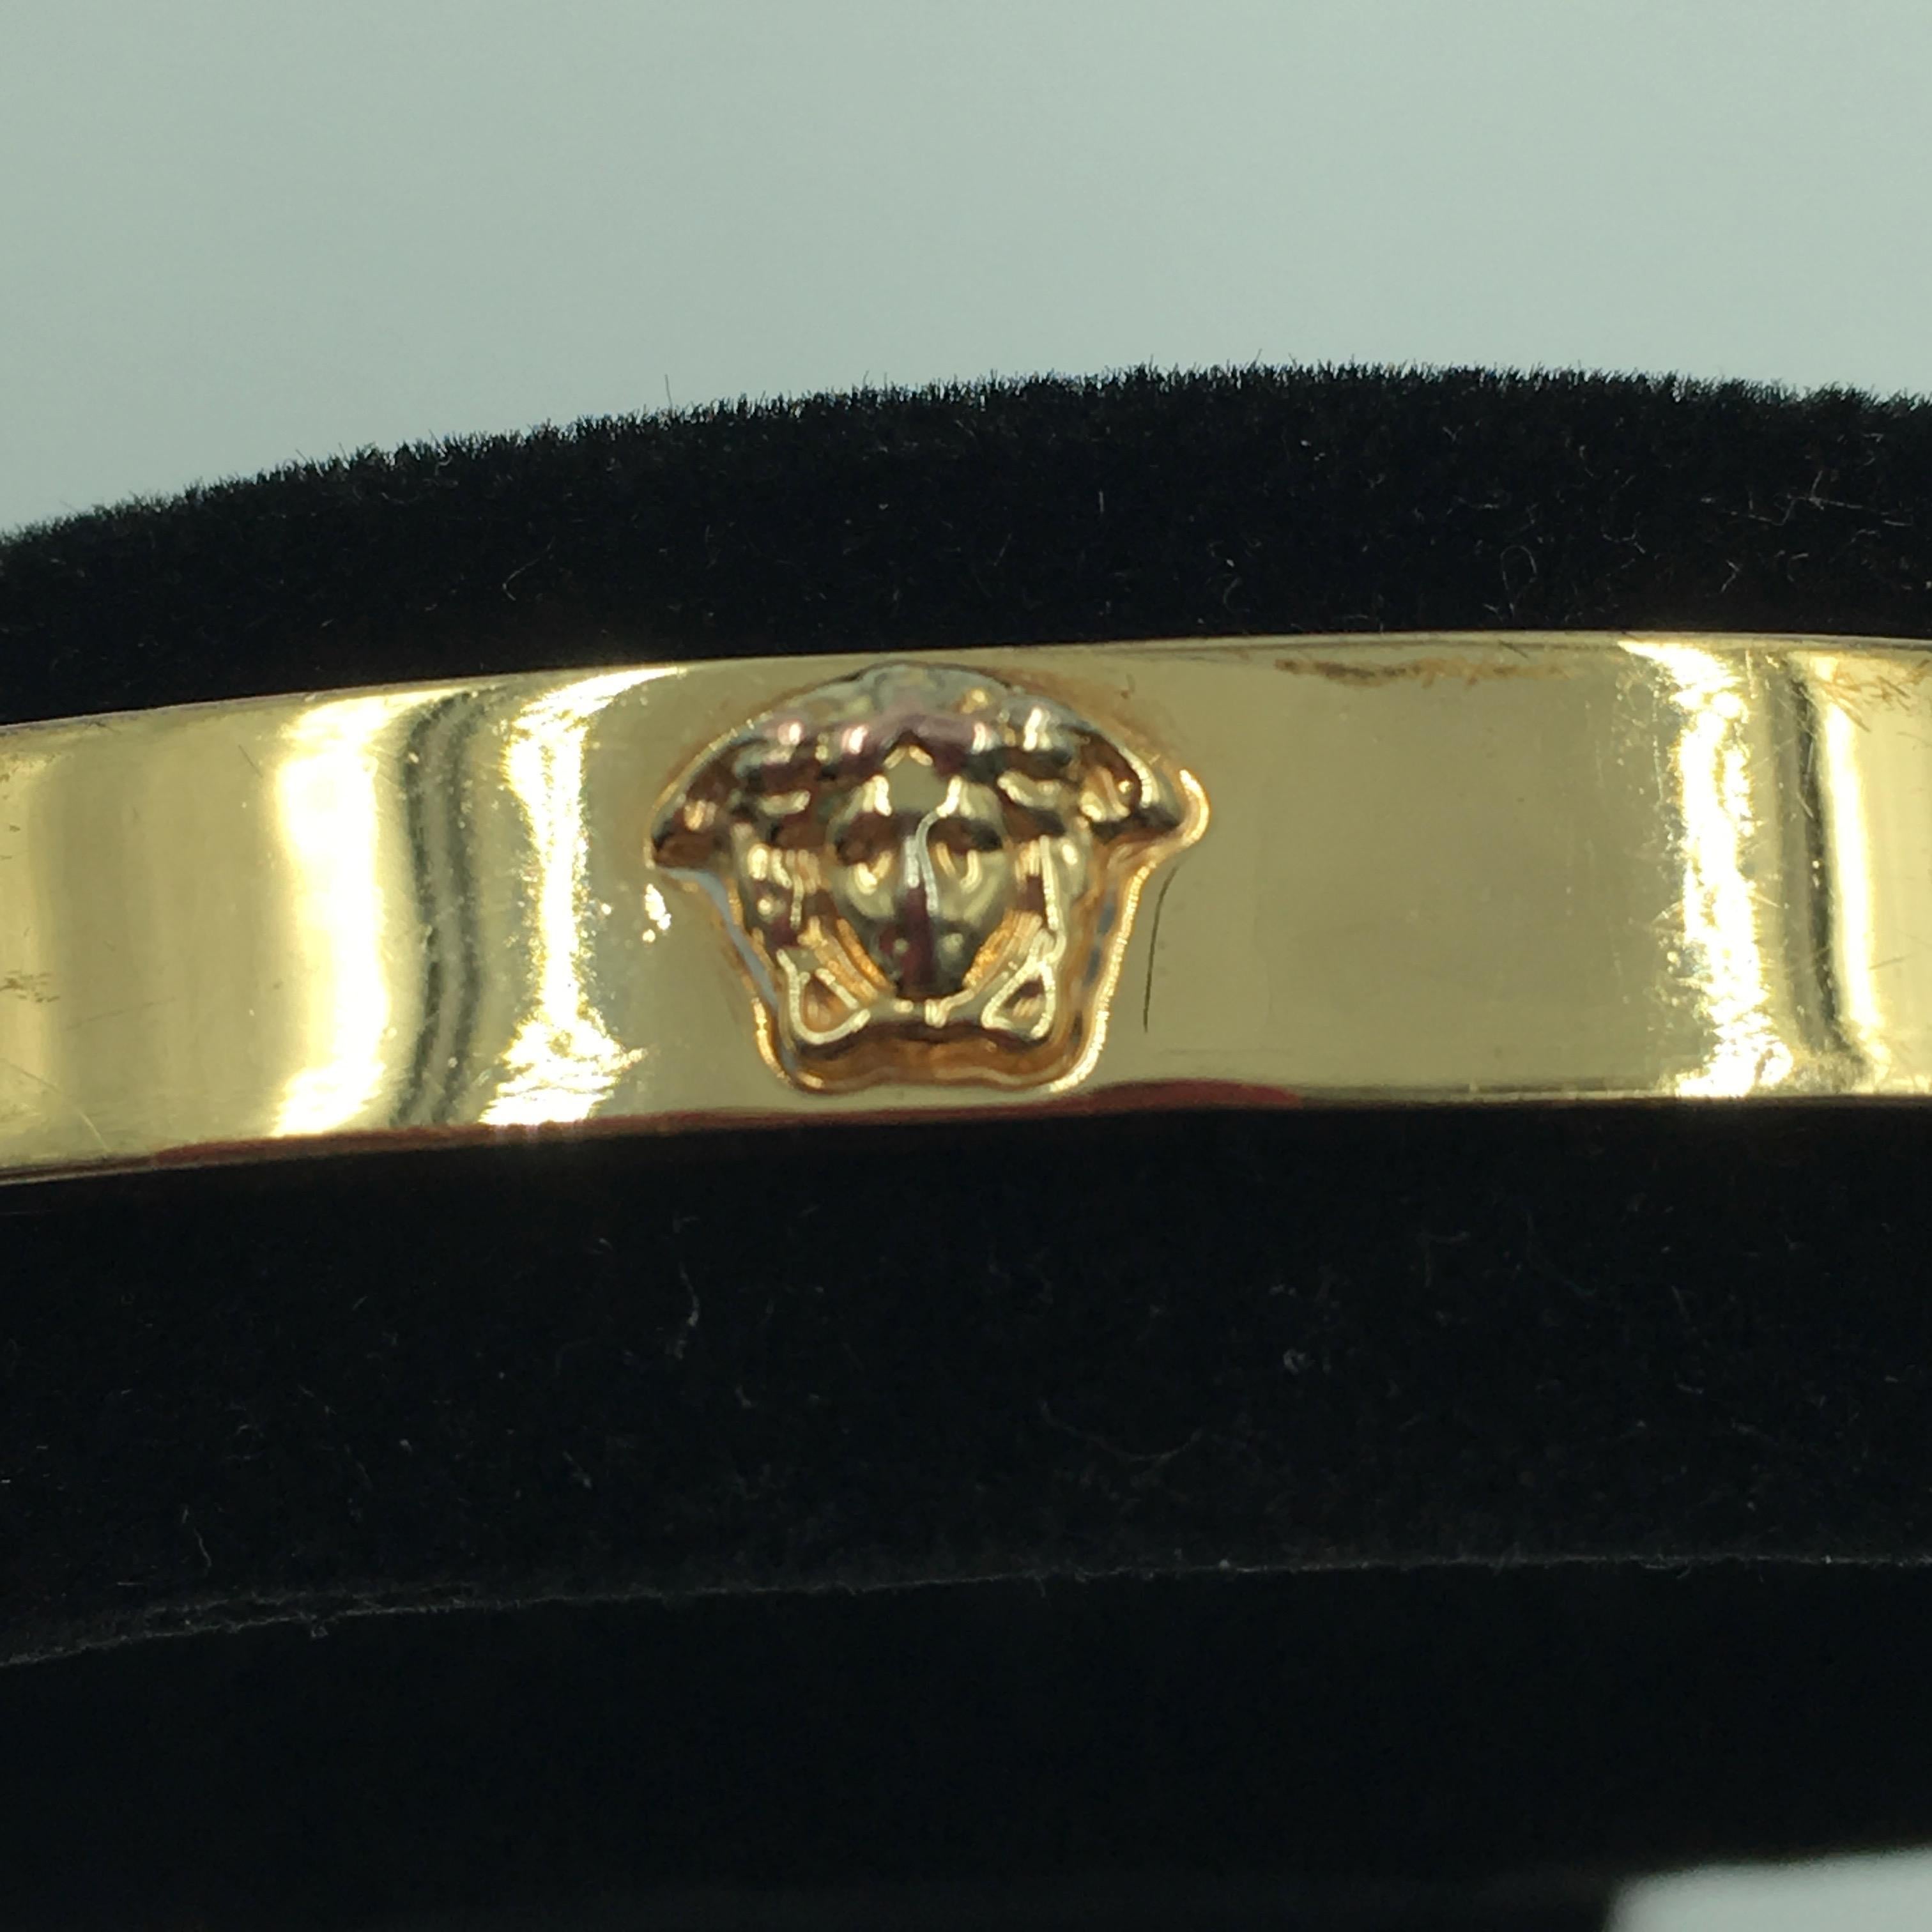 Gianni Versace Gold Plated Medusa Bangle Bracelet. Single Medusa head on top of bracelet. Bracelet has a hidden hook closure.
Good vintage condition.

Outer measurements are as follows:
Width- 2 3/4